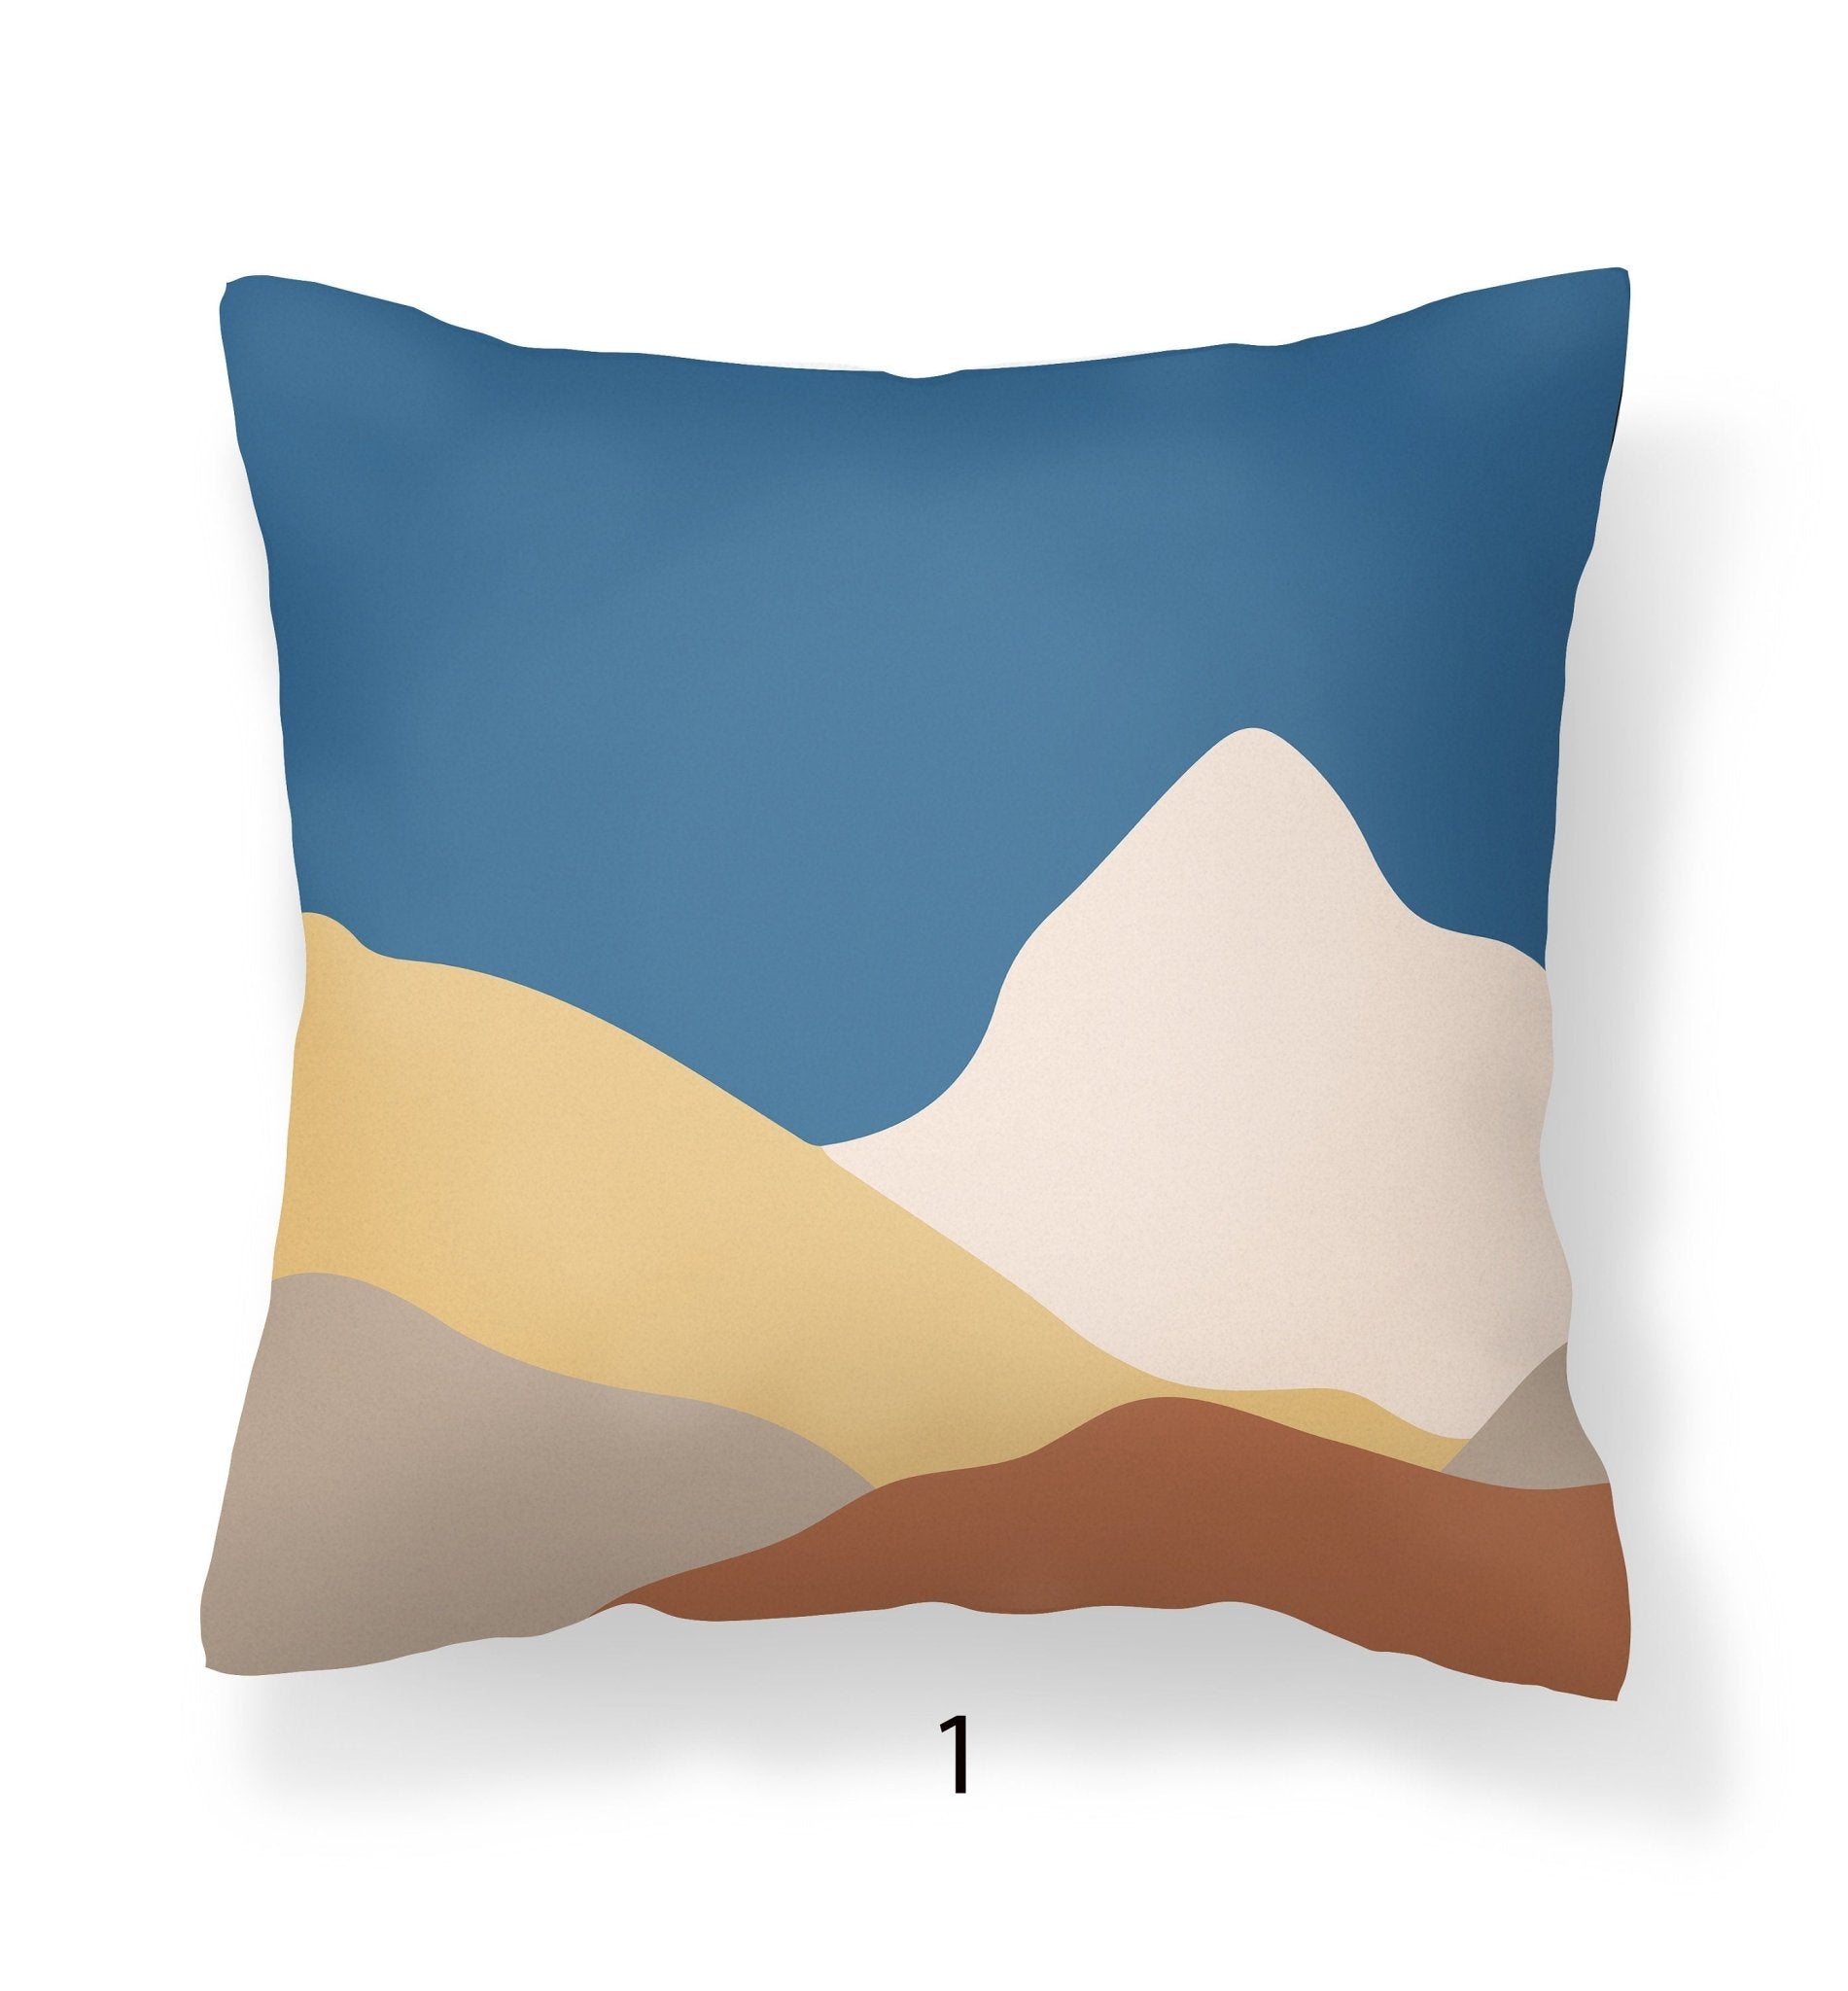 How to Mix Pillow Covers and Where to Buy Them